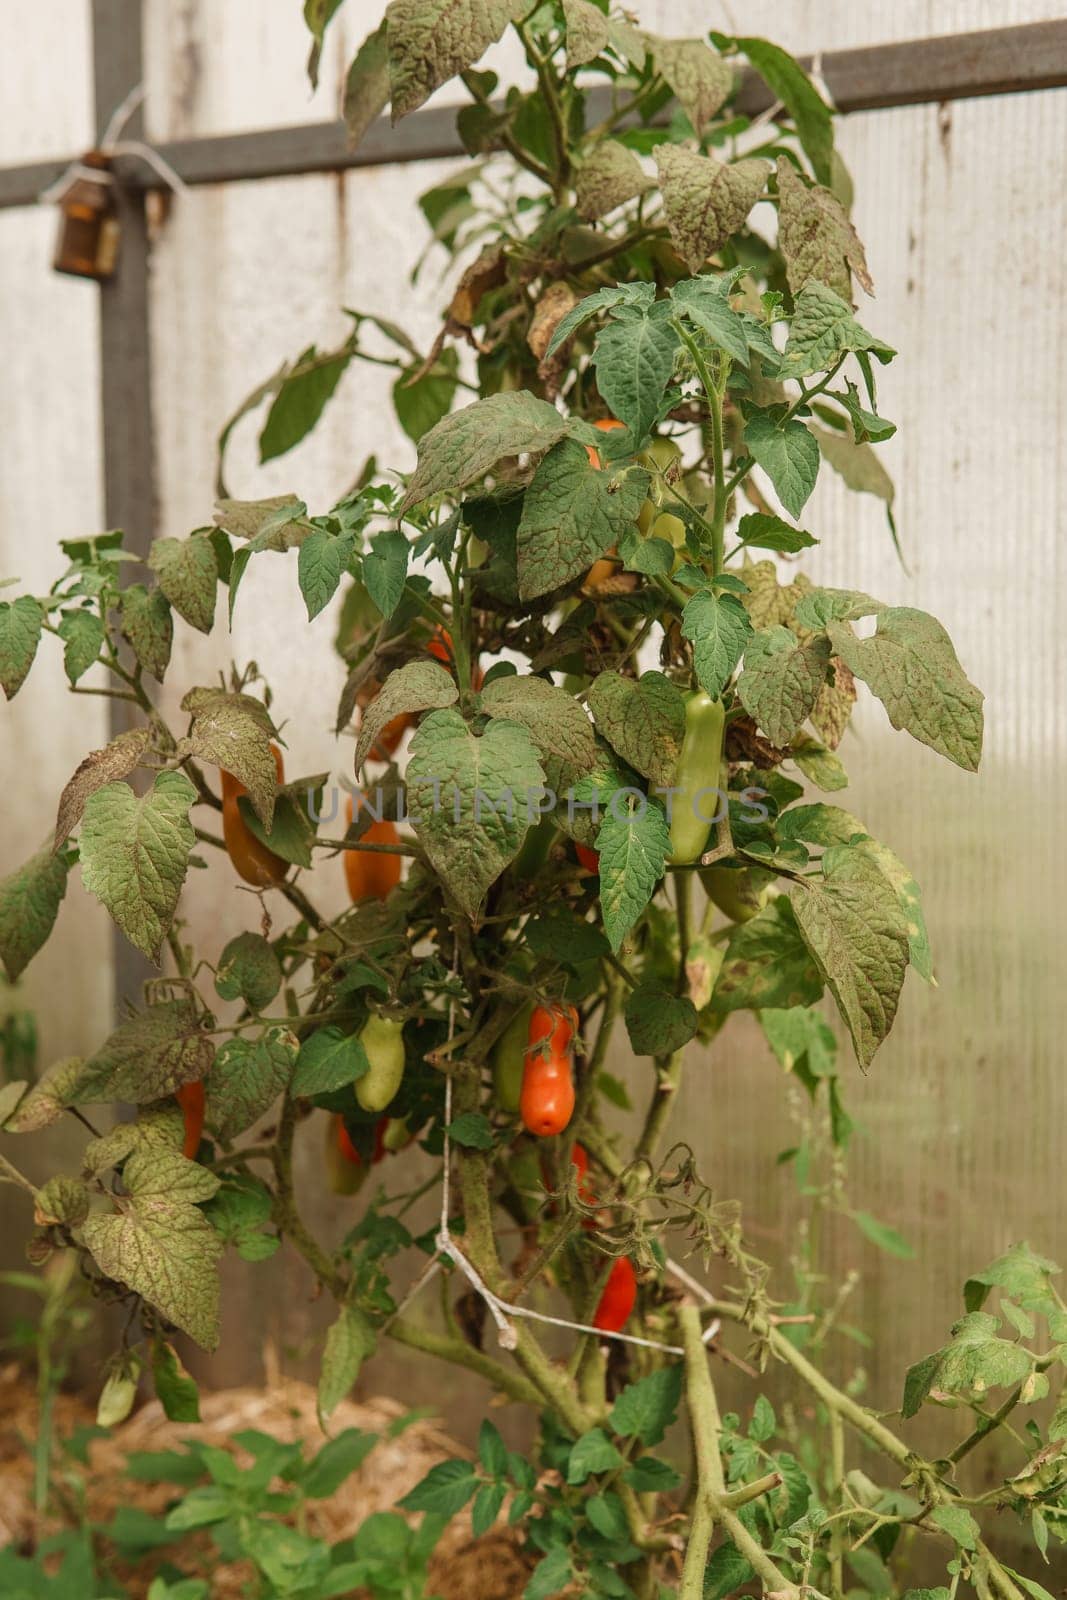 Tomatoes are hanging on a branch in the greenhouse. by Annu1tochka